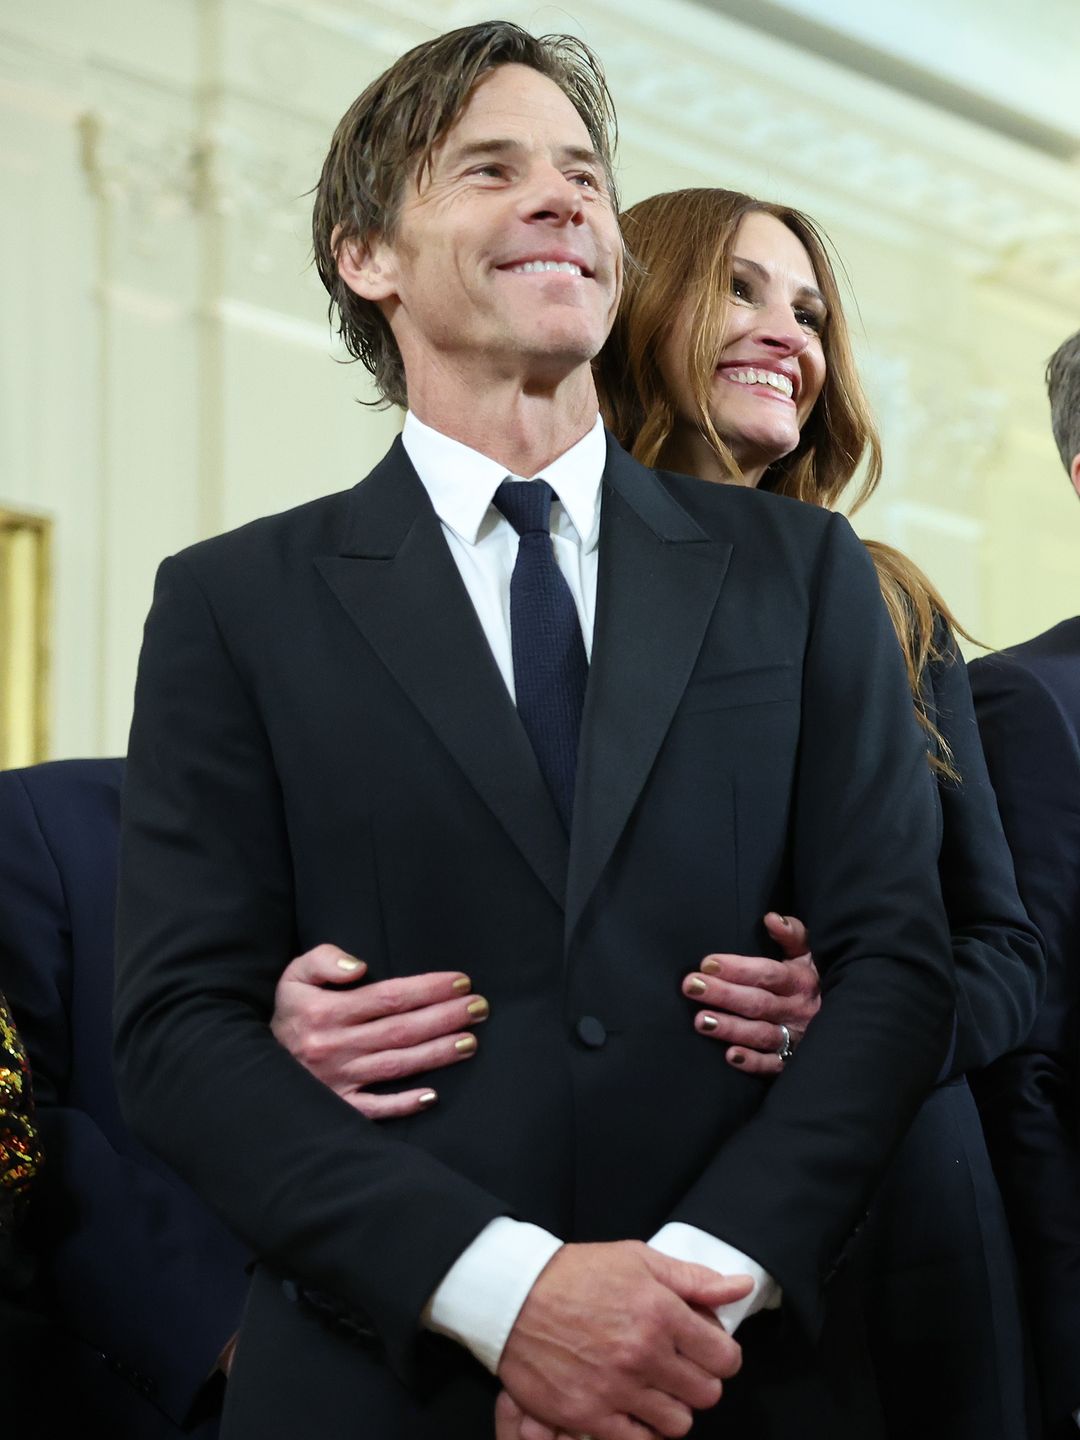 Julia Roberts smiling and hugging a smiling Daniel Moder from behind